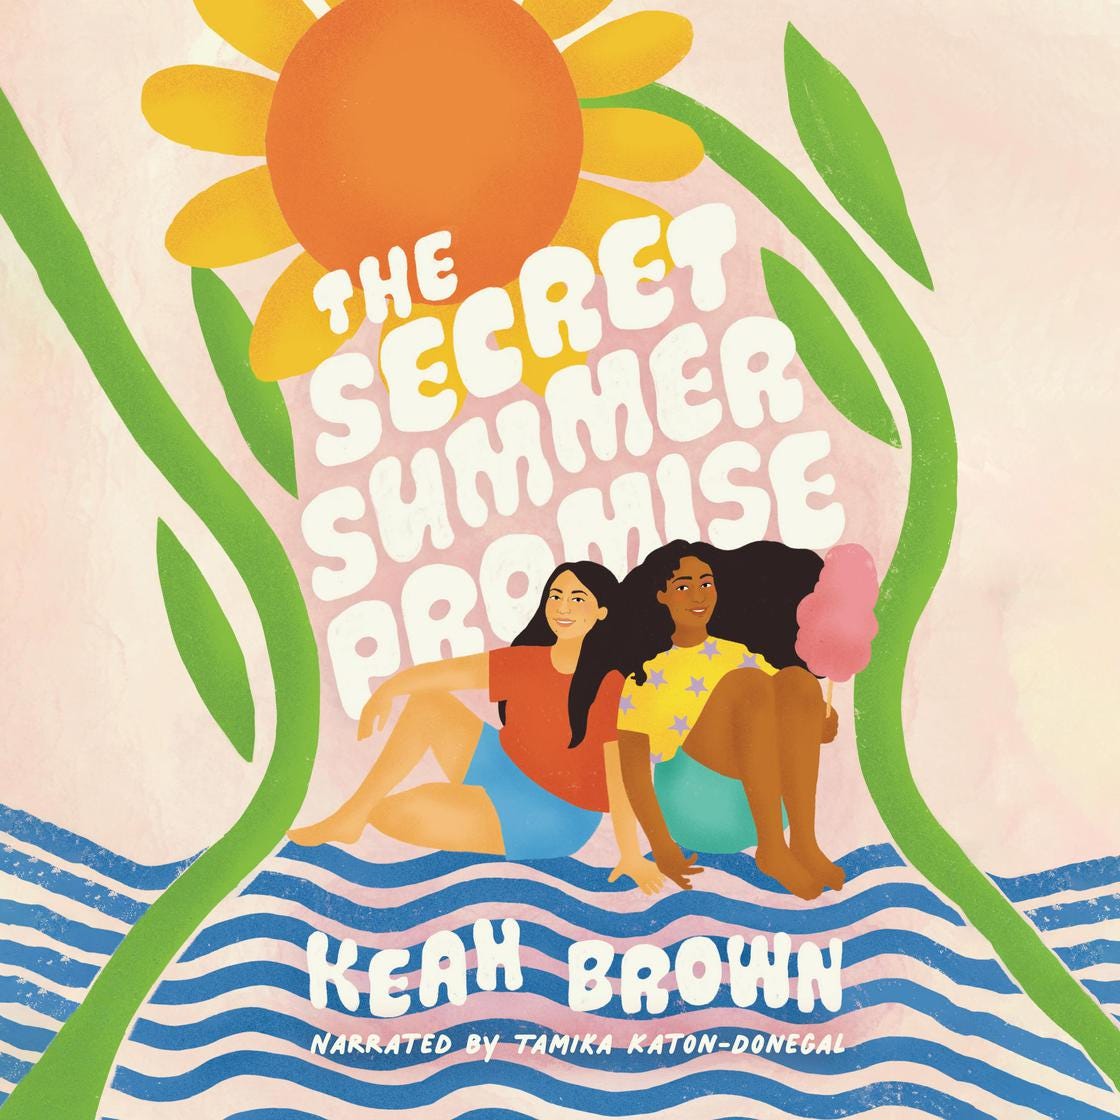 The audiobook cover of The Secret Summer Promise.